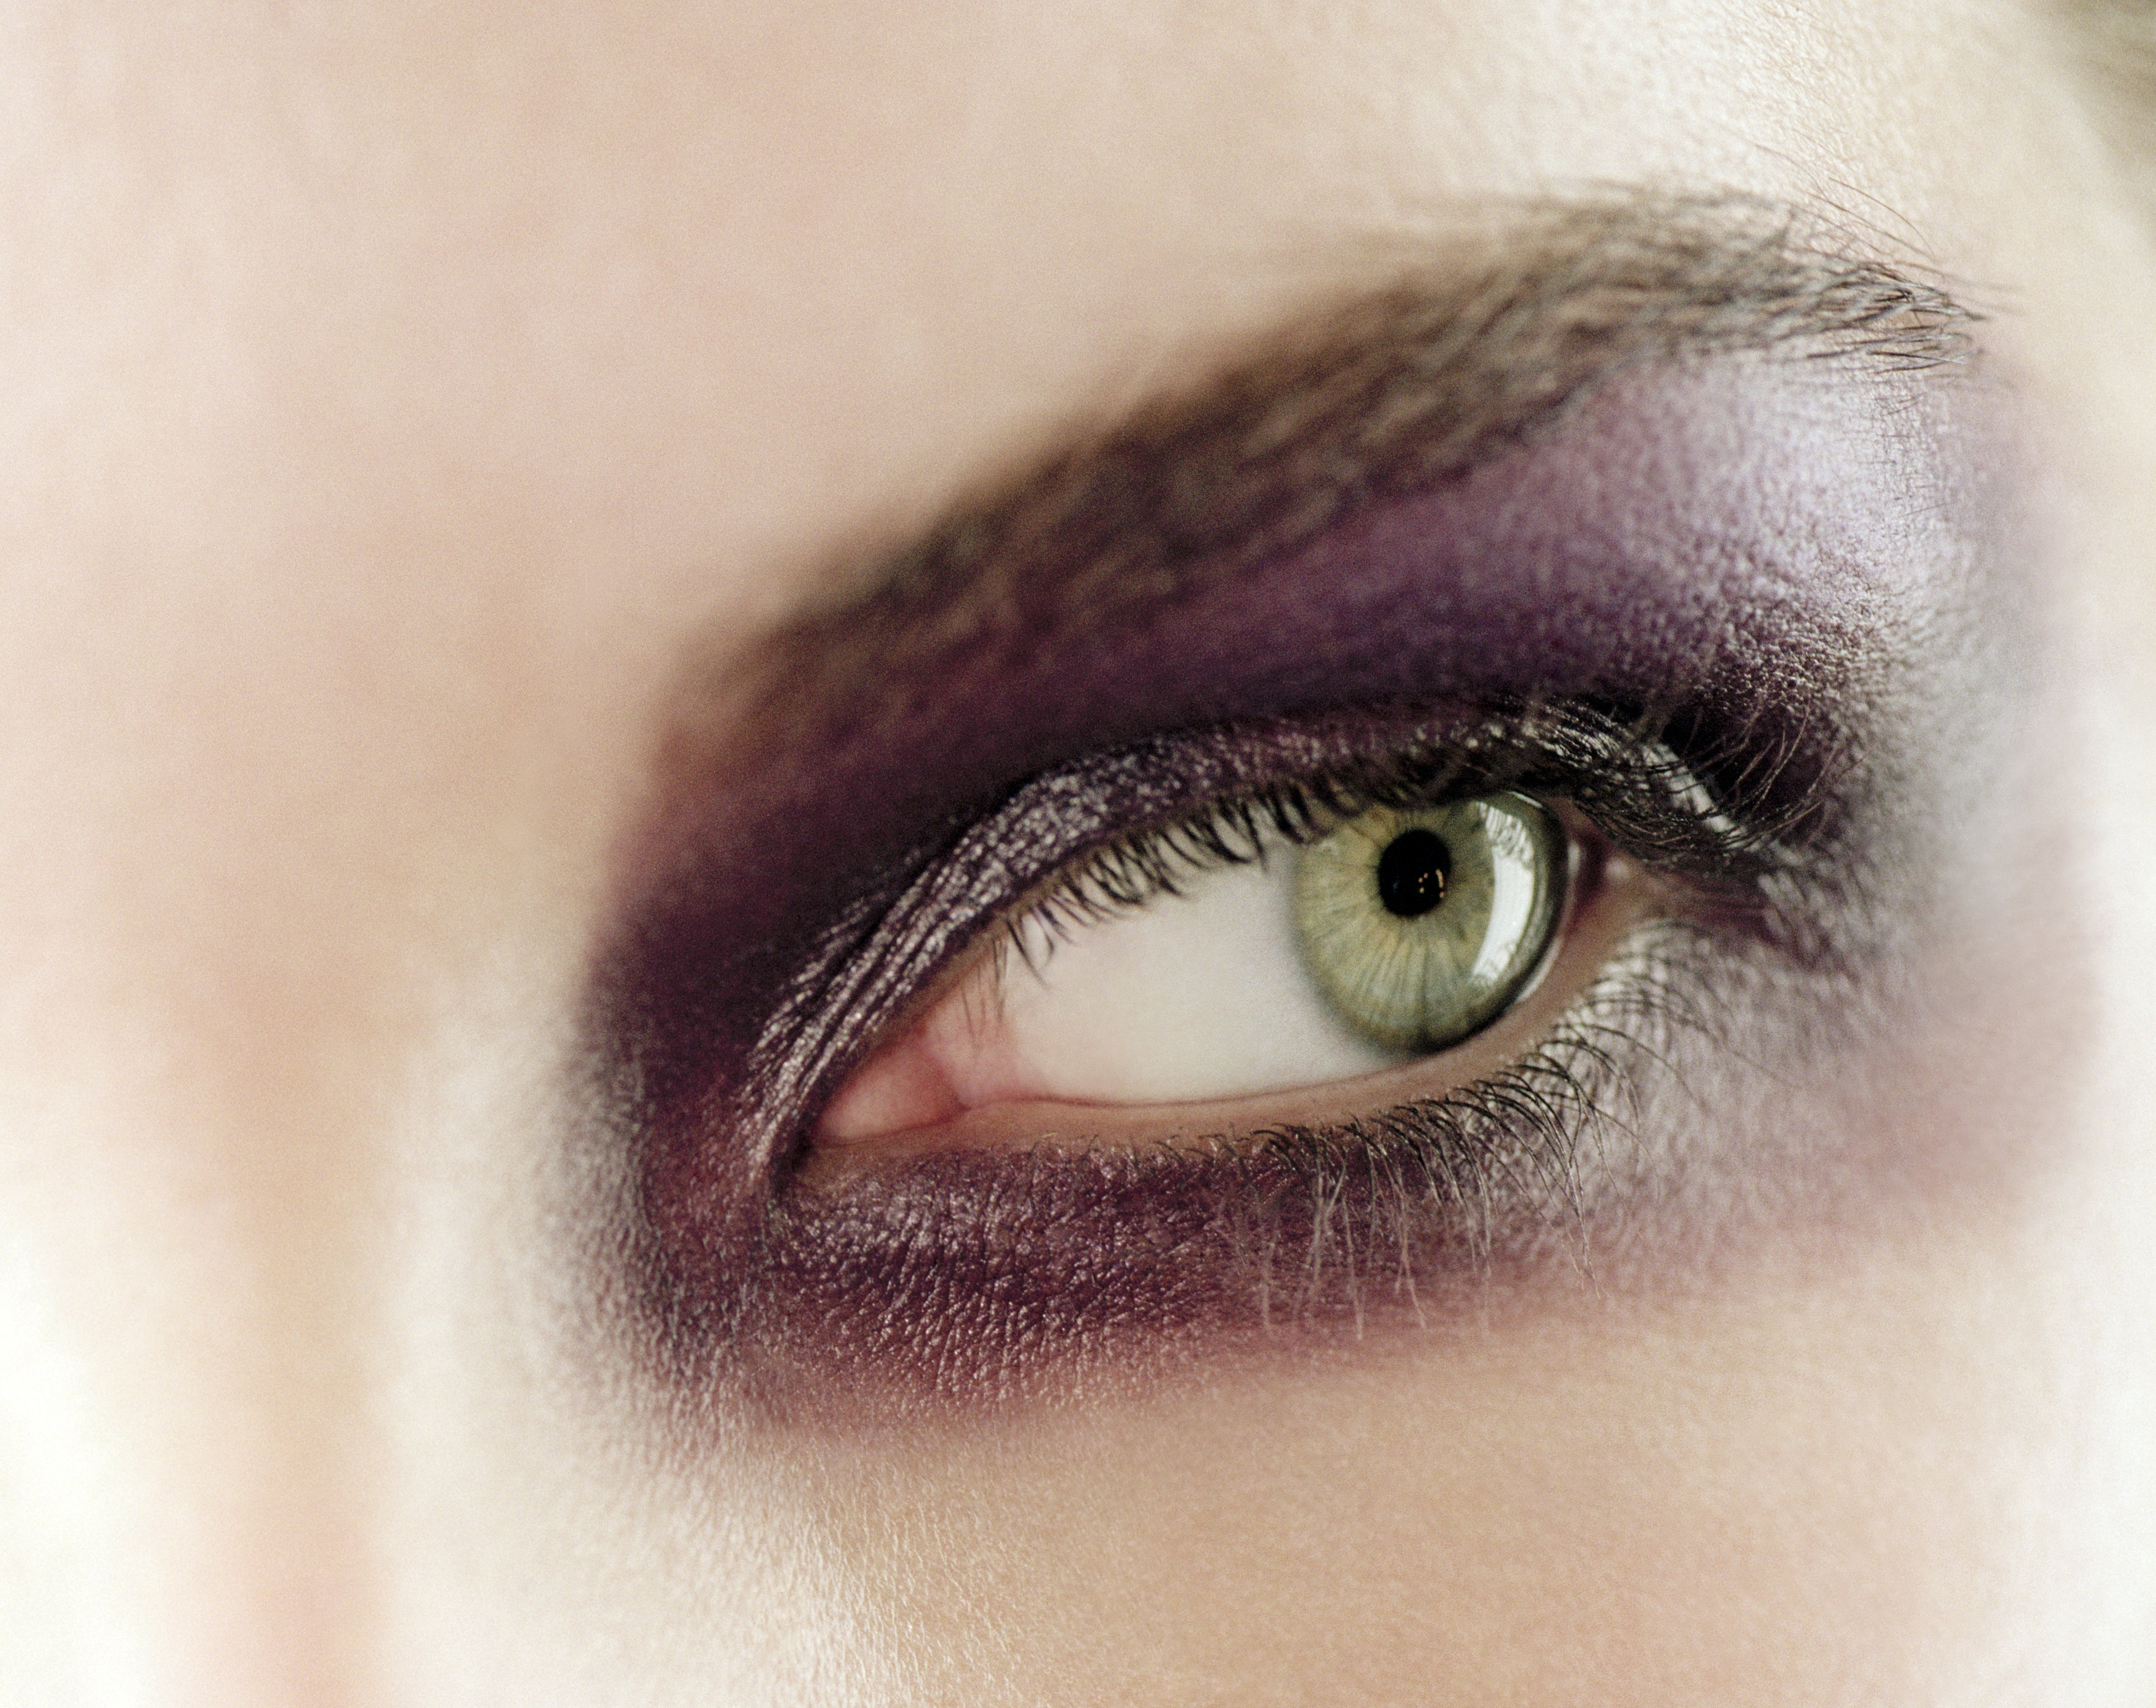 Young green-eyed woman wearing purple eyeshadow. | Source: Getty Images